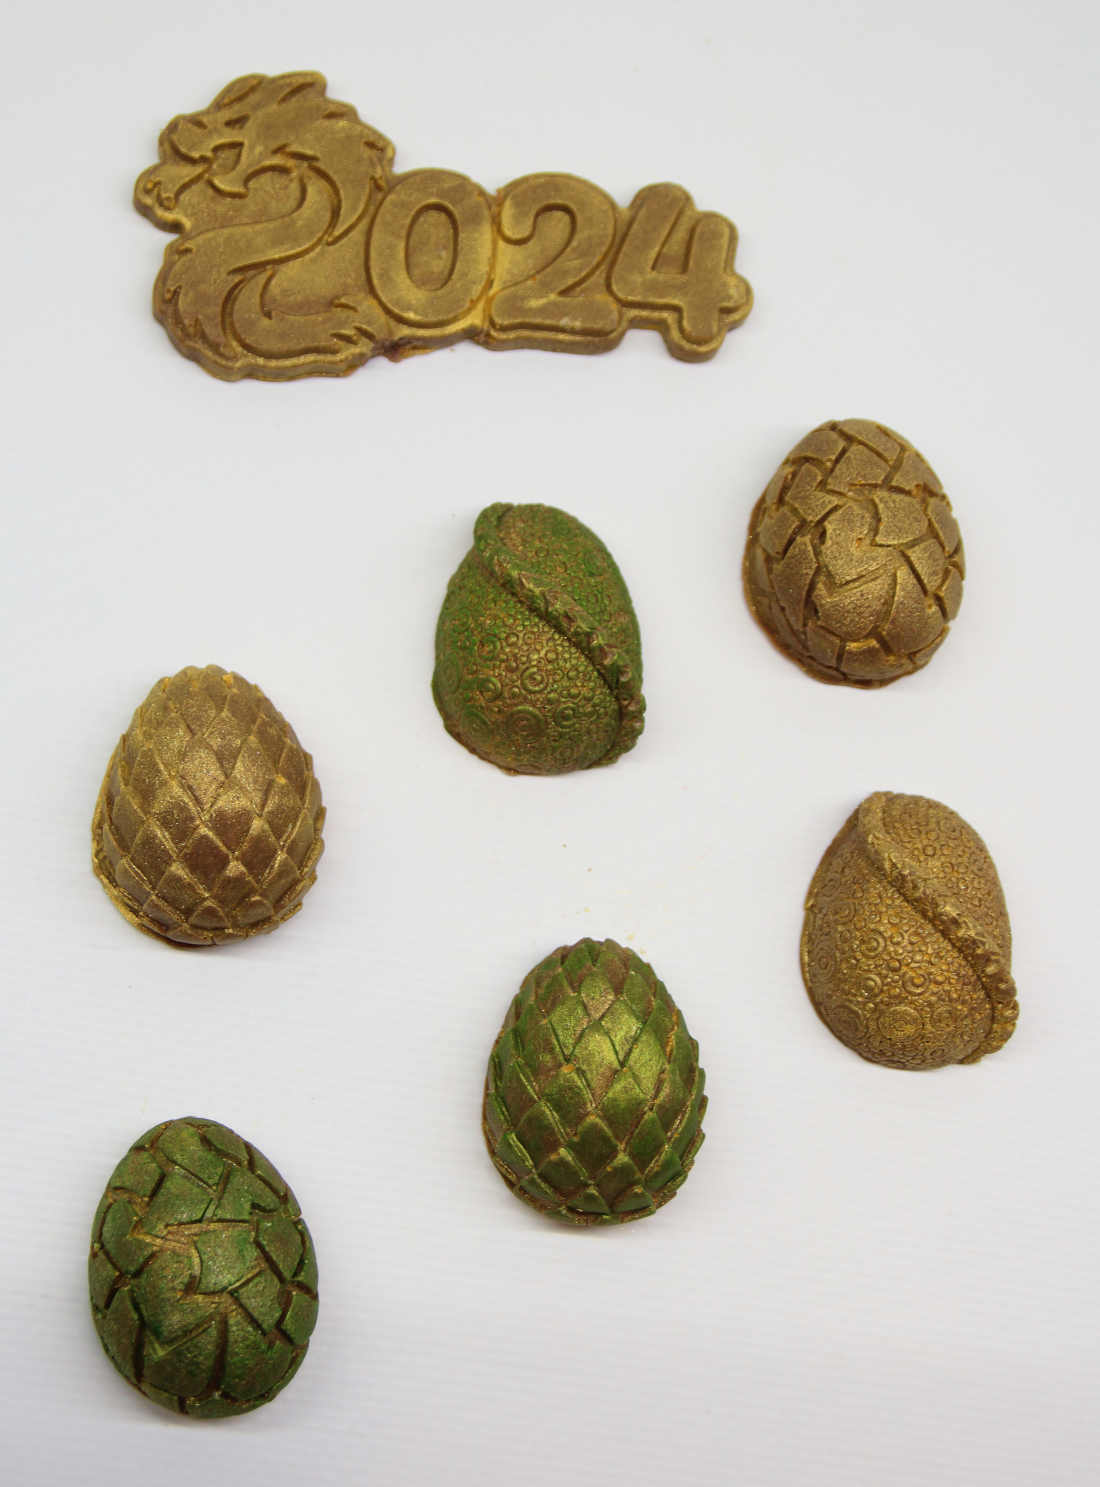 Colored chocolate dragon eggs for 2024 year